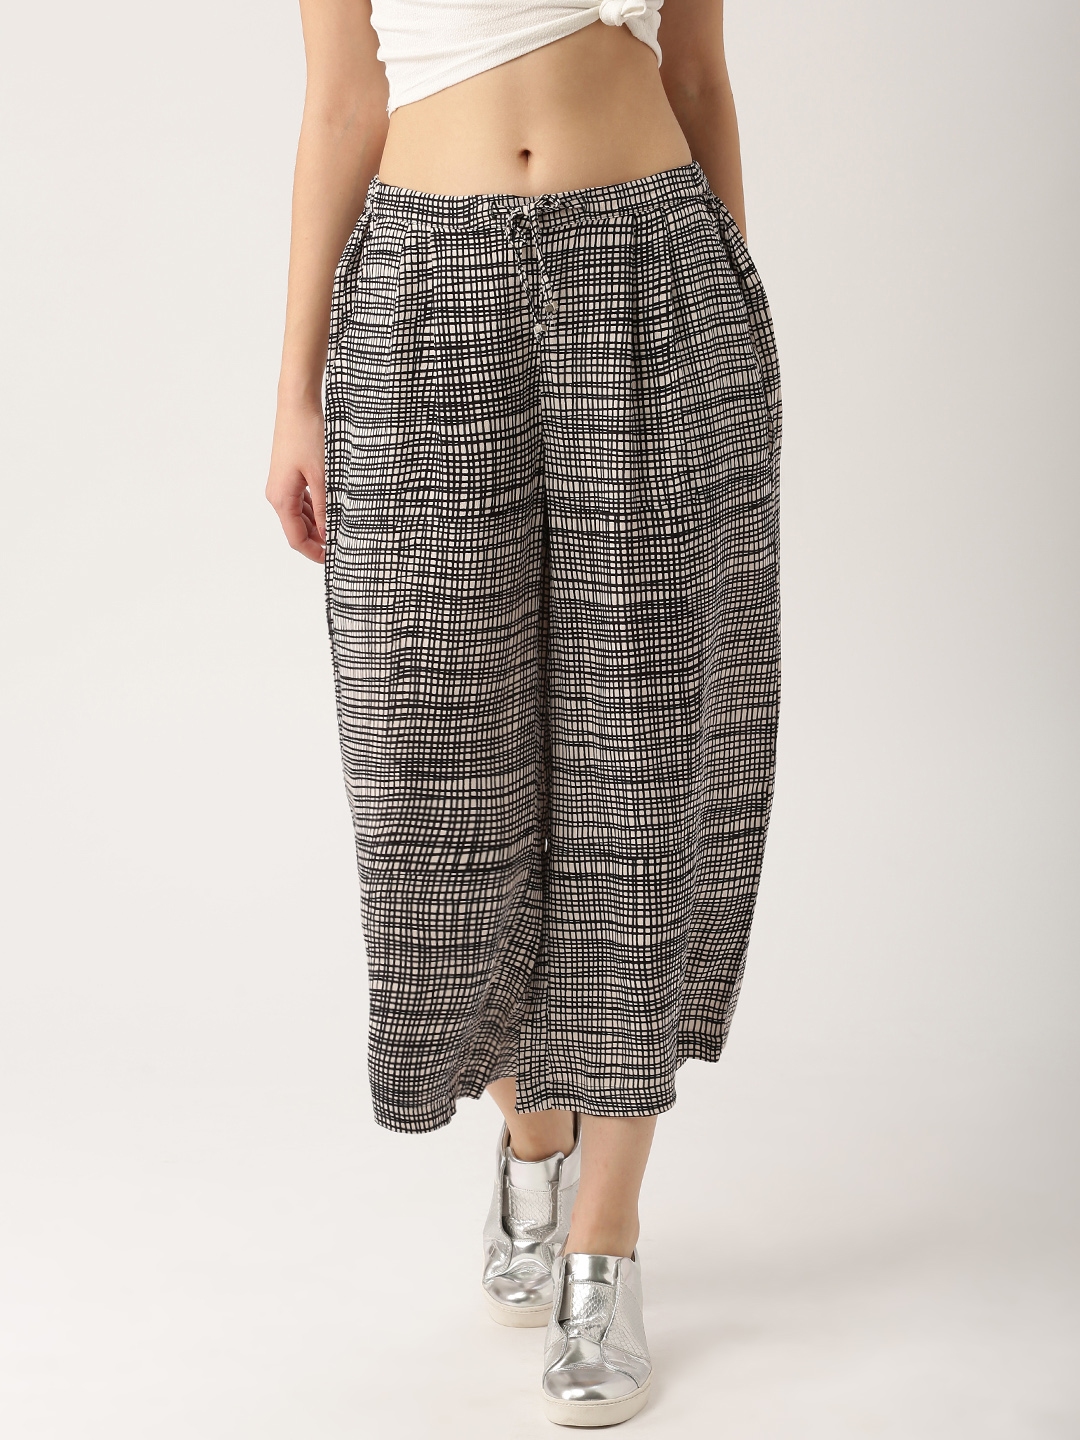 Buy DressBerry Women Black & Off White Regular Fit Checked Culottes ...